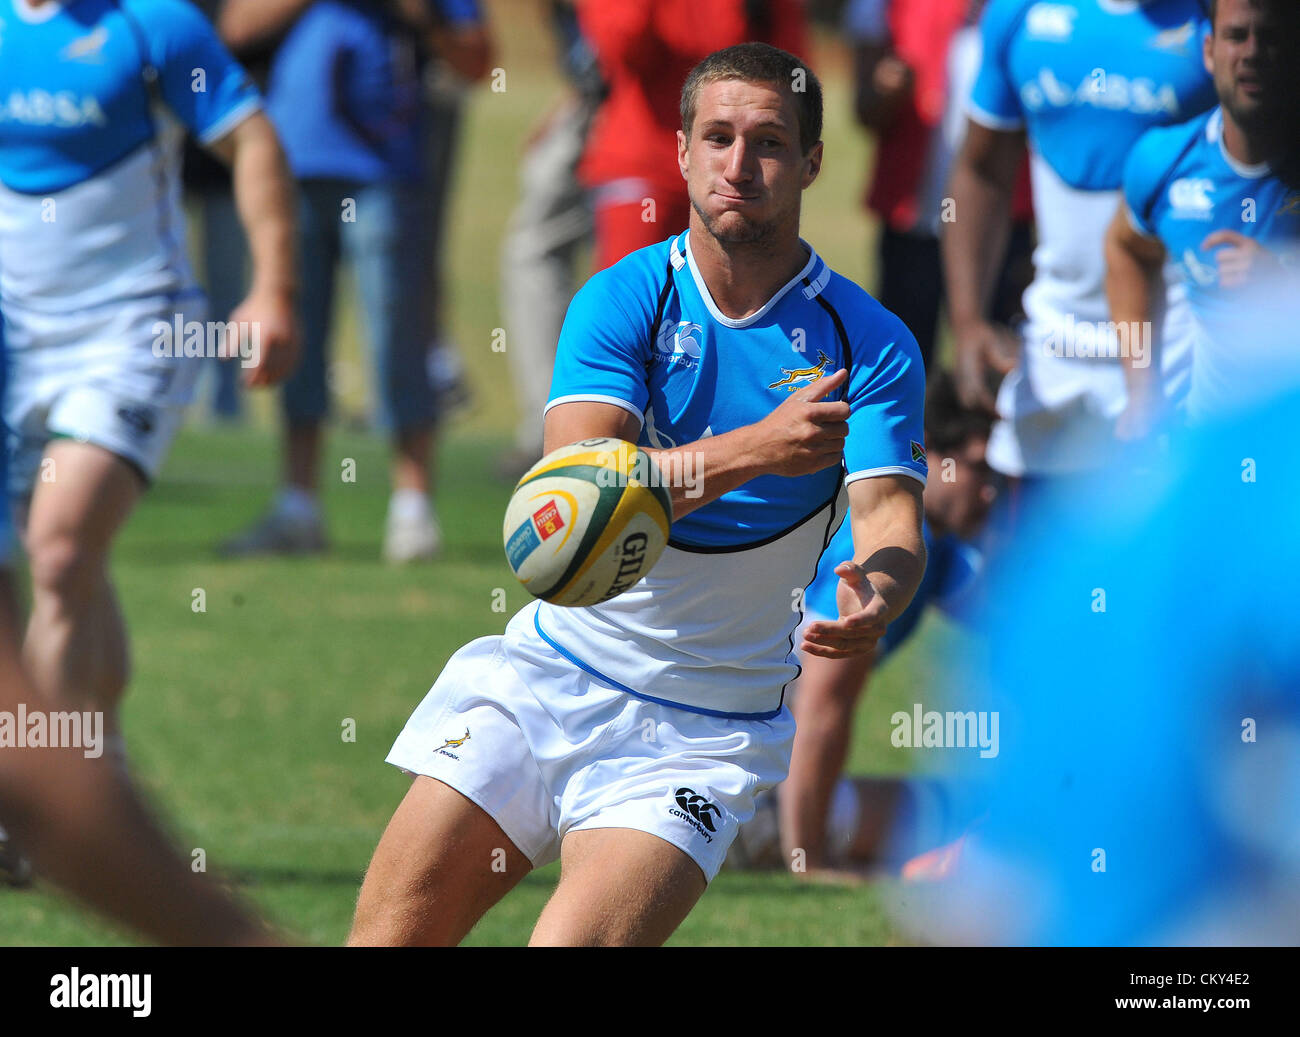 JOHANNESBURG, SOUTH AFRICA - SEPTEMBER 01, Johan Goosen soreads the ball during the South African national rugby team field session and media conference at KES on September 01, 2012 in Johannesburg, South Africa Photo by Duif du Toit / Gallo Images Stock Photo